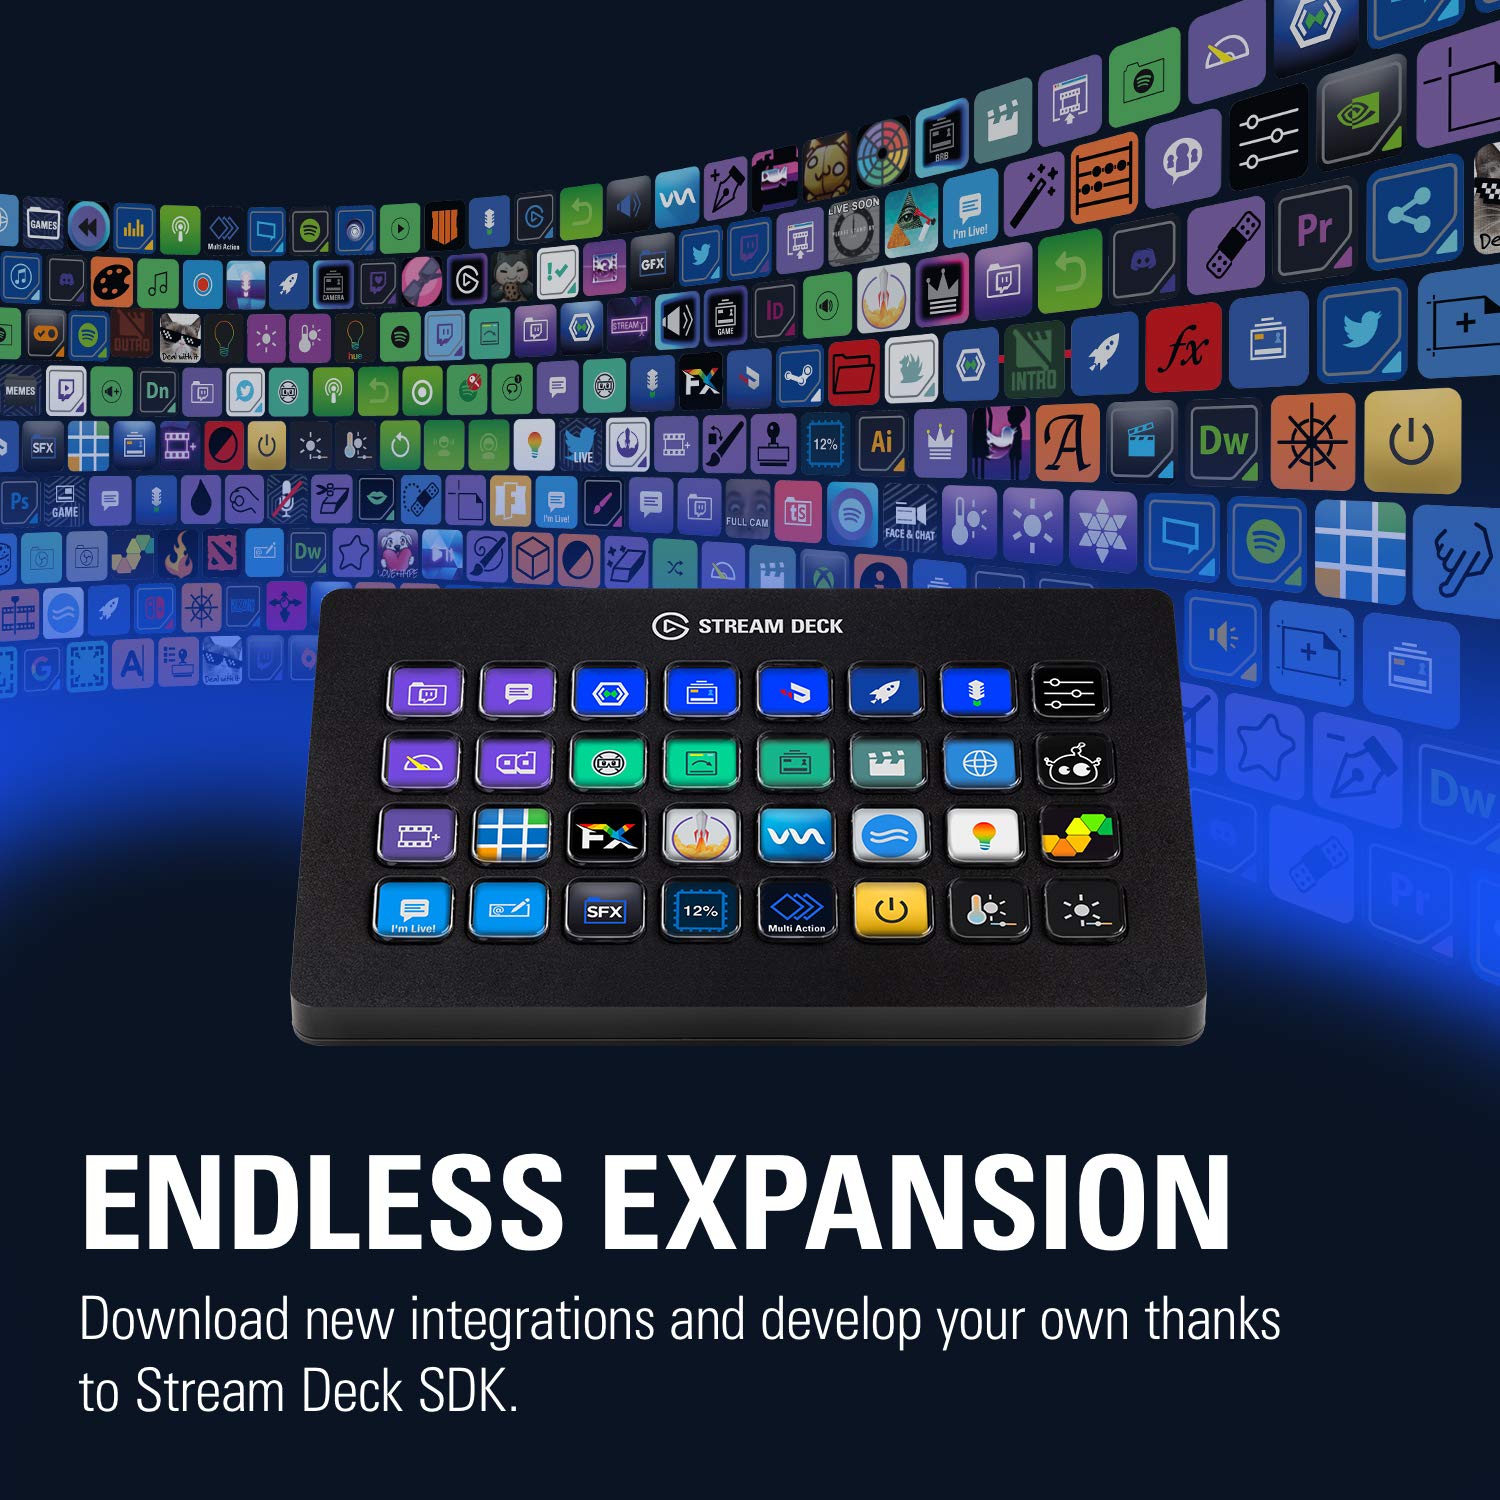 Elgato Stream Deck XL – Advanced Studio Controller, 32 macro keys, trigger actions in apps and software like OBS, Twitch, ​YouTube and more, works with Mac and PC